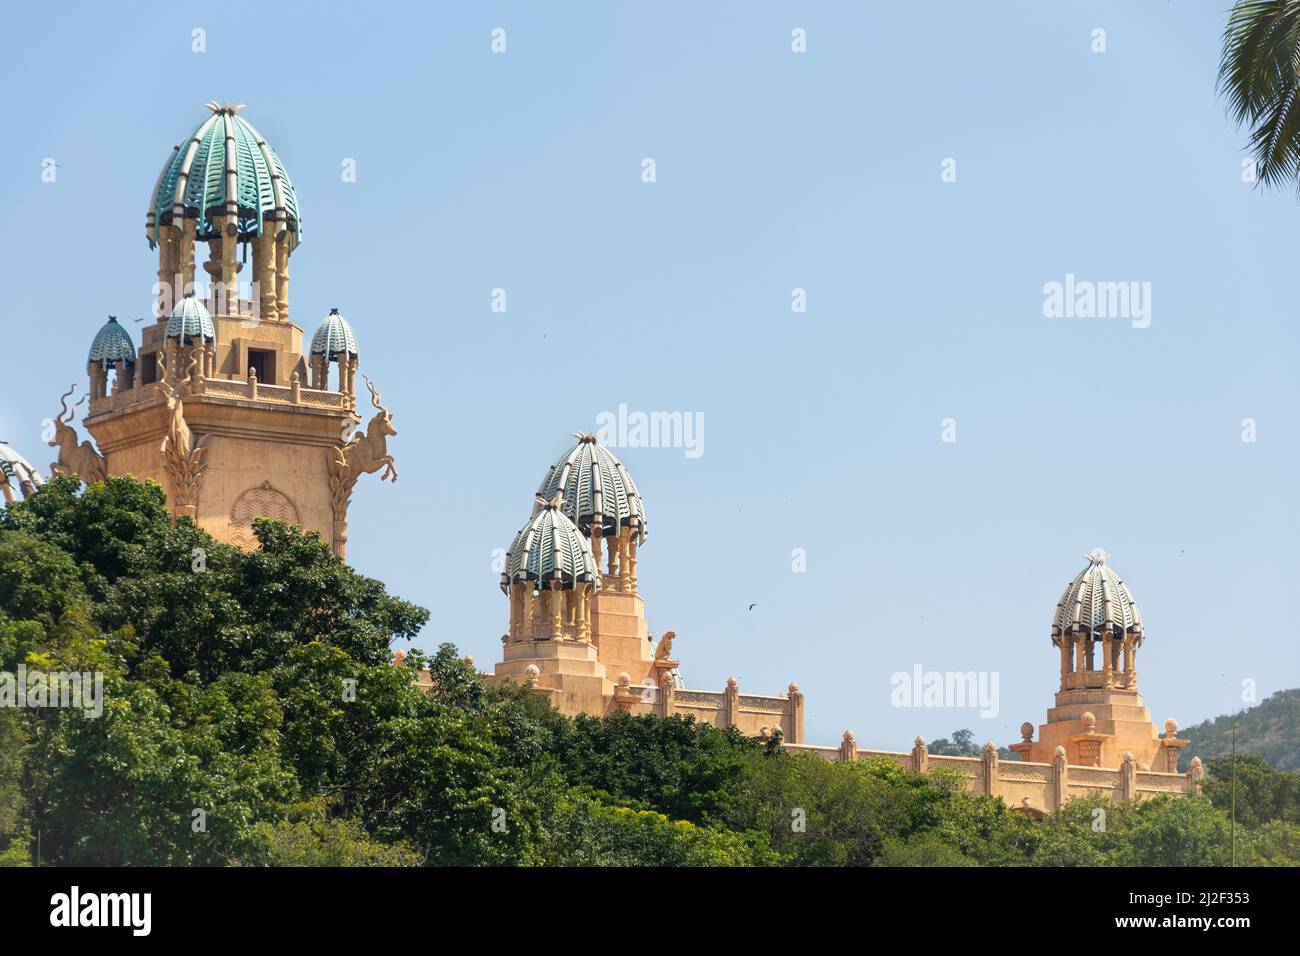 The Palace. Lost City. Sun City. SOUTH AFRICA, 14-03-2018 Stock Photo